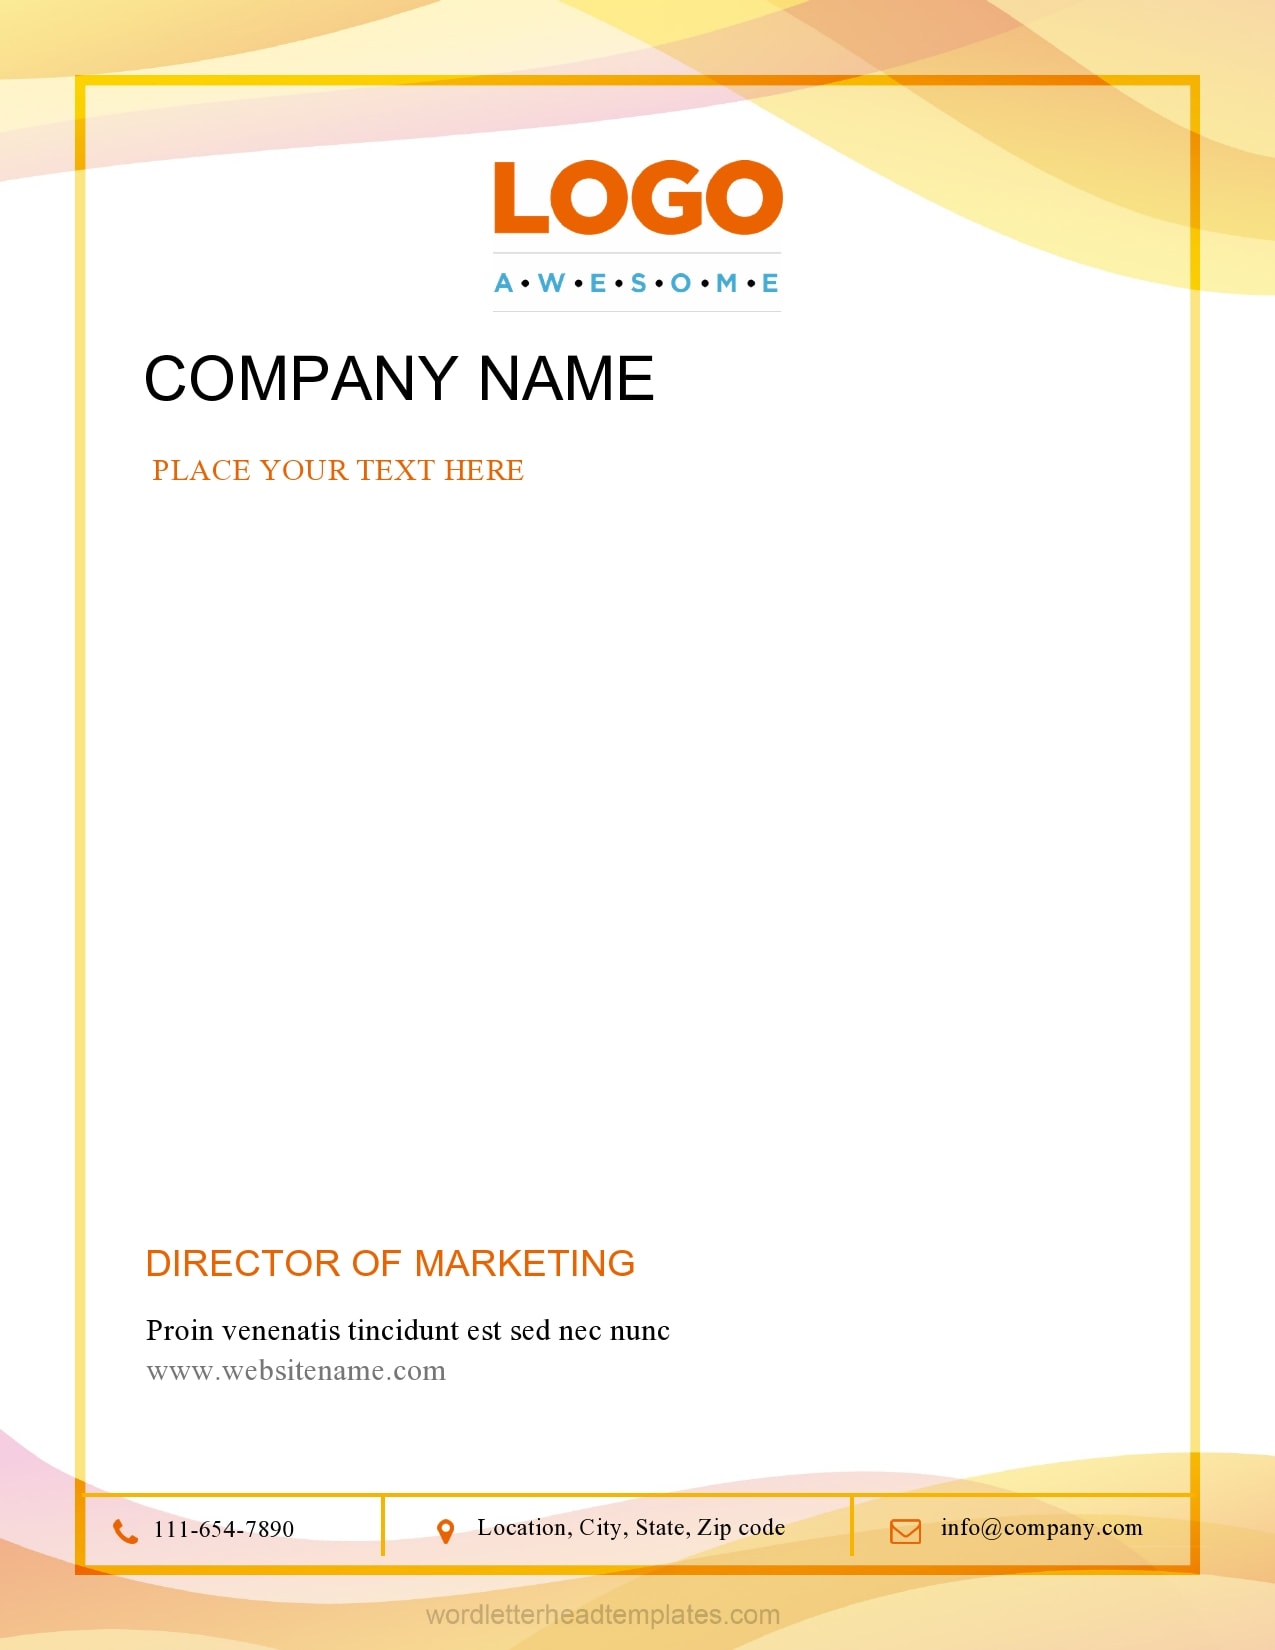 cover letter on company letterhead